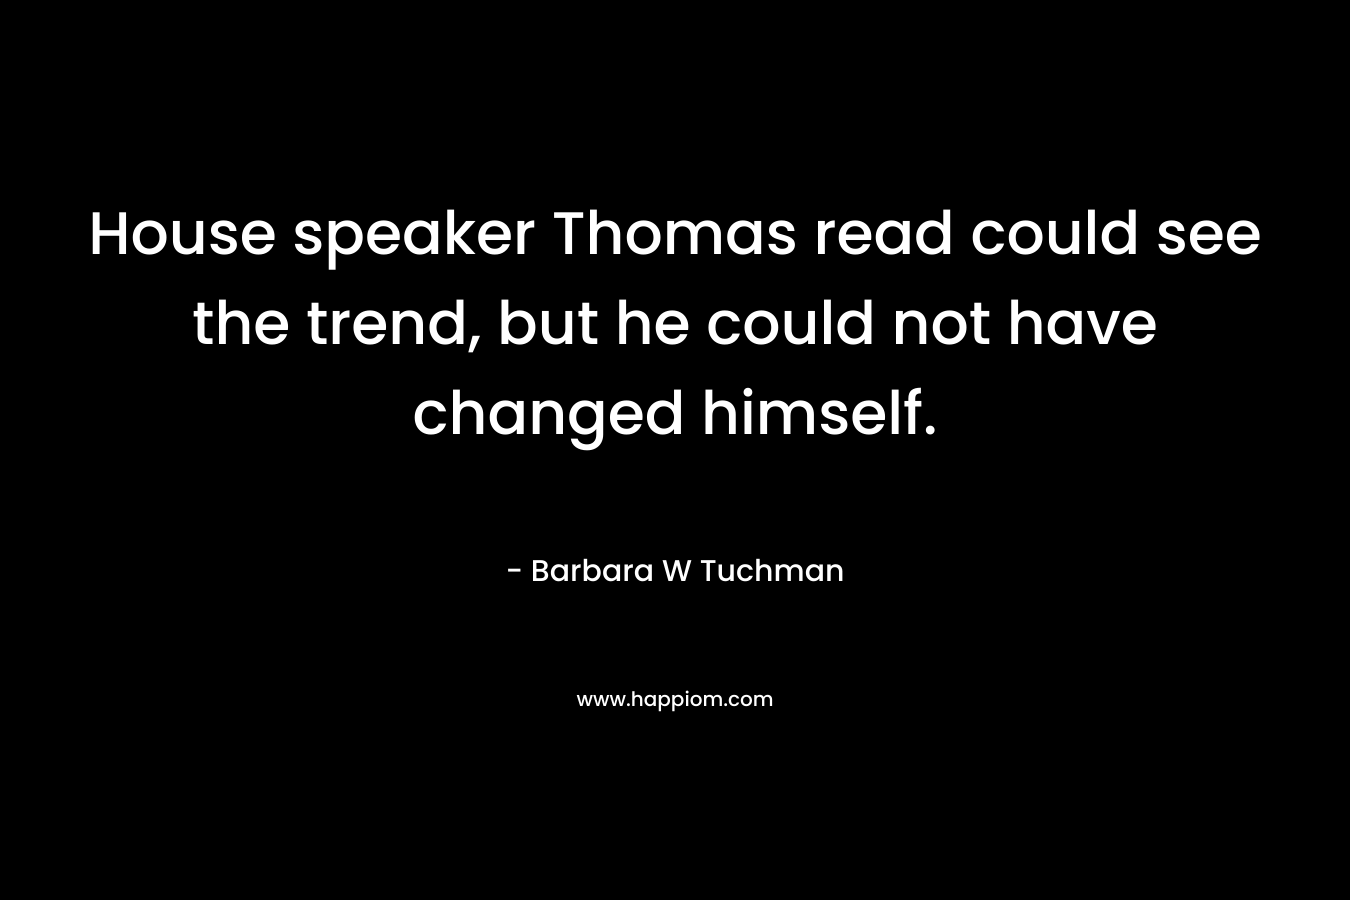 House speaker Thomas read could see the trend, but he could not have changed himself.